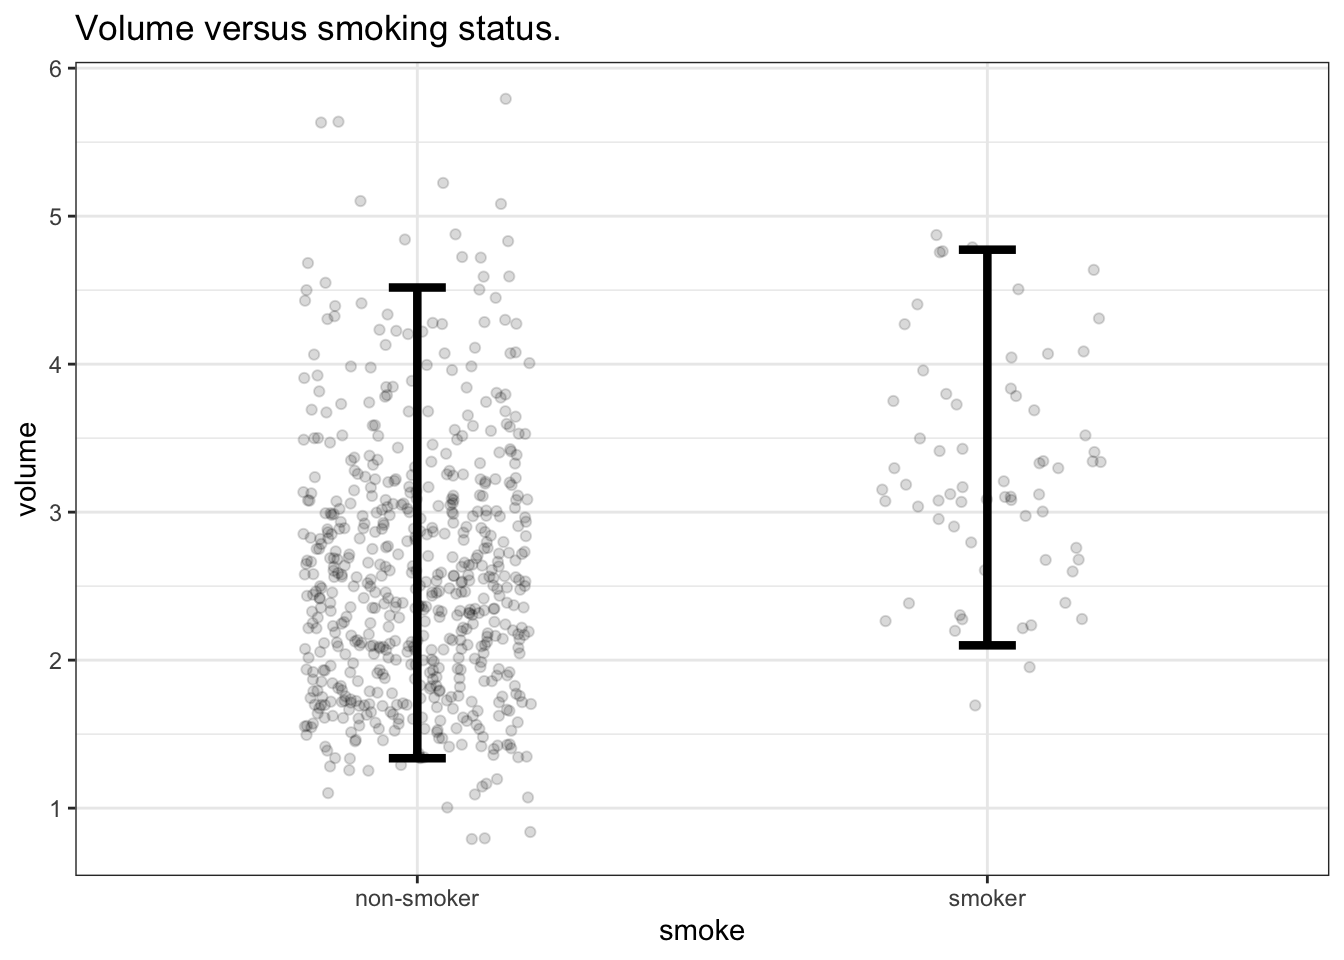 Lung volume versus smoking status along with the 95% summary interval for the lung volume of the people in each group.